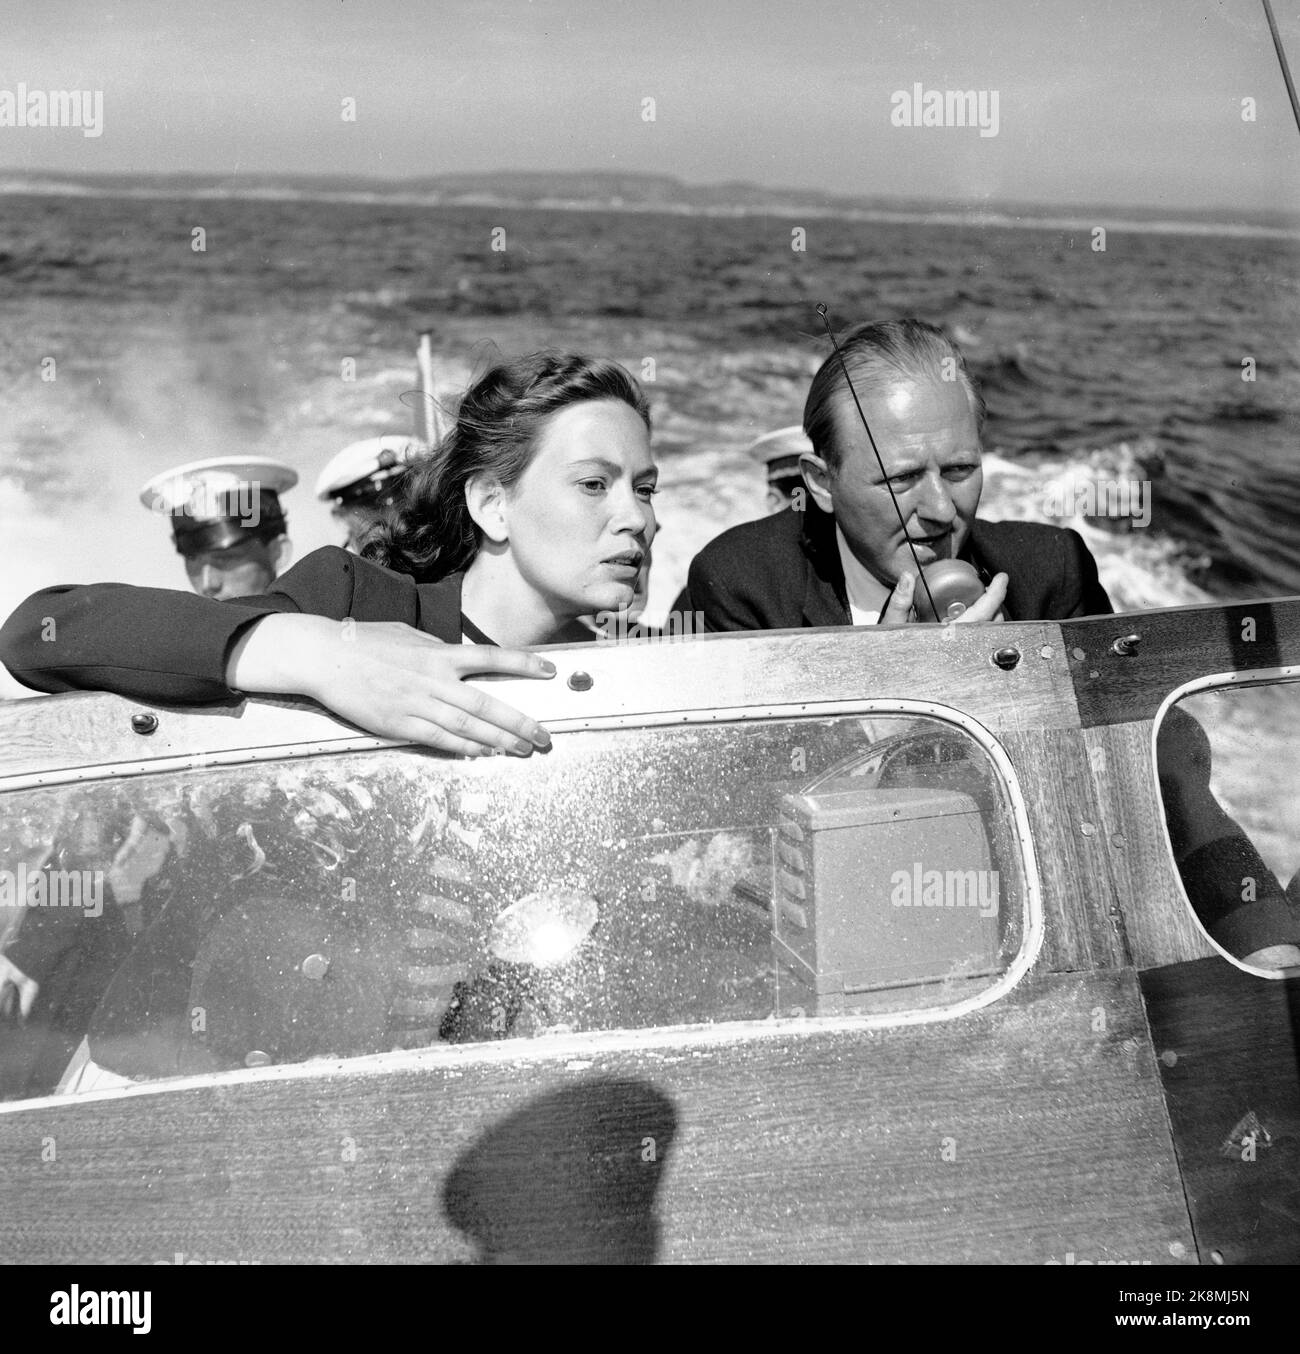 Hankø in the summer of 1956. Recording Norway's first feature film in color, titled 'Smugglers in tuxedo'. Here 'Police Officer Reidar Nissen' played by Carsten Byhring, who is hunting for the big smugglers in a boat belonging to the Customs Service, Anne Lise Tangstad (who plays Eva). Both the Swedish and Norwegian Customs Service agreed to join the film. Photo: Aage Storløkken / Current / NTB. Stock Photo